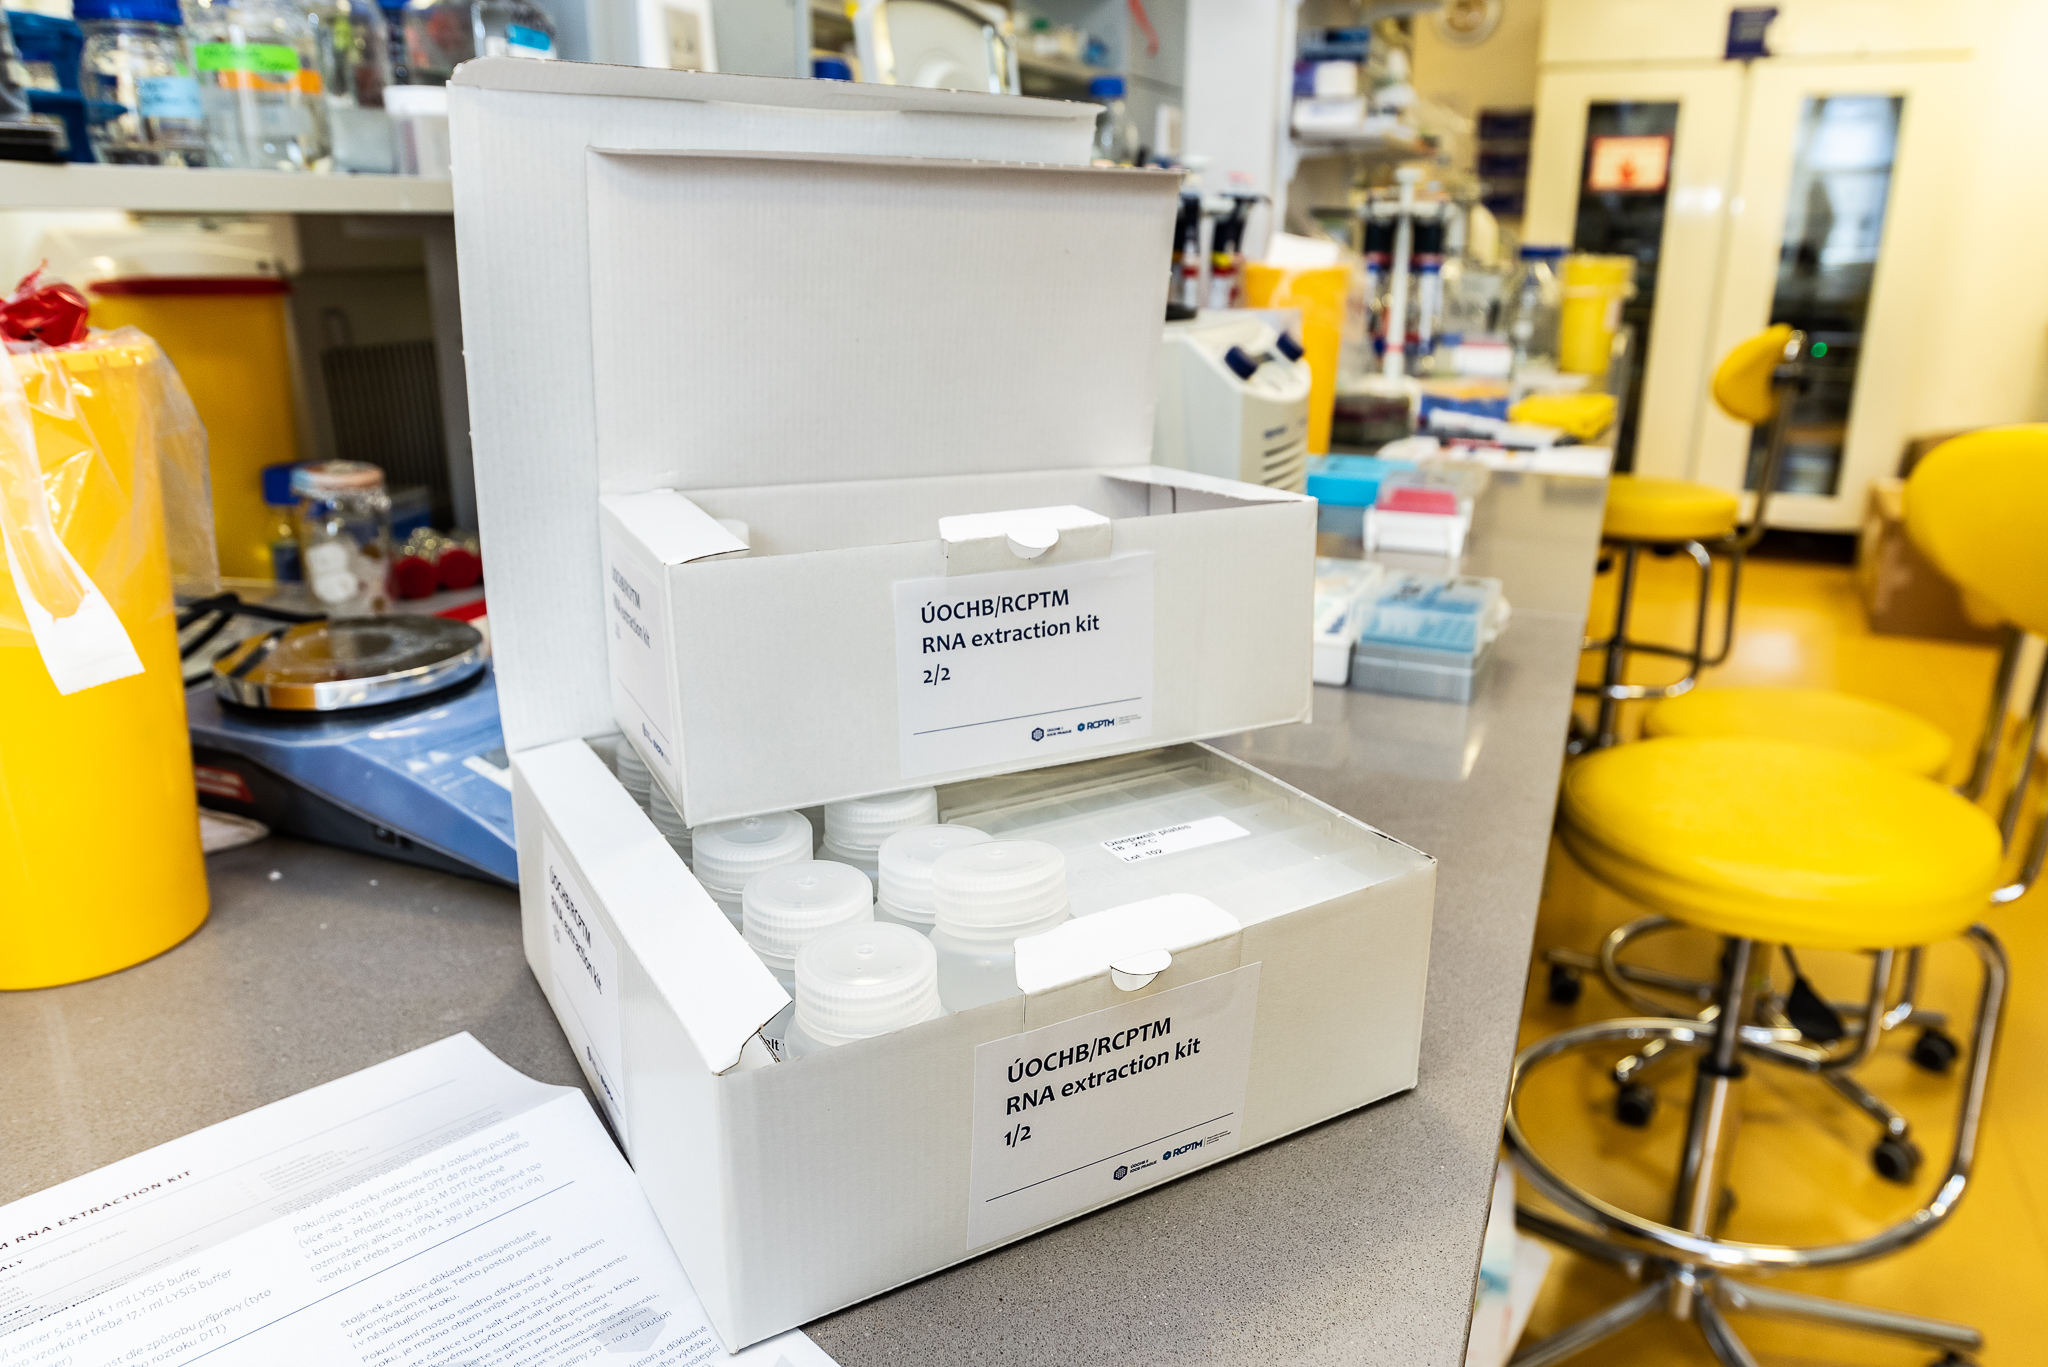 IOCB Tech donated kits for 10,000 isolations of viral RNA for COVID-19 testing to PHI Ostrava. Photo: Tomáš Belloň / IOCB Prague